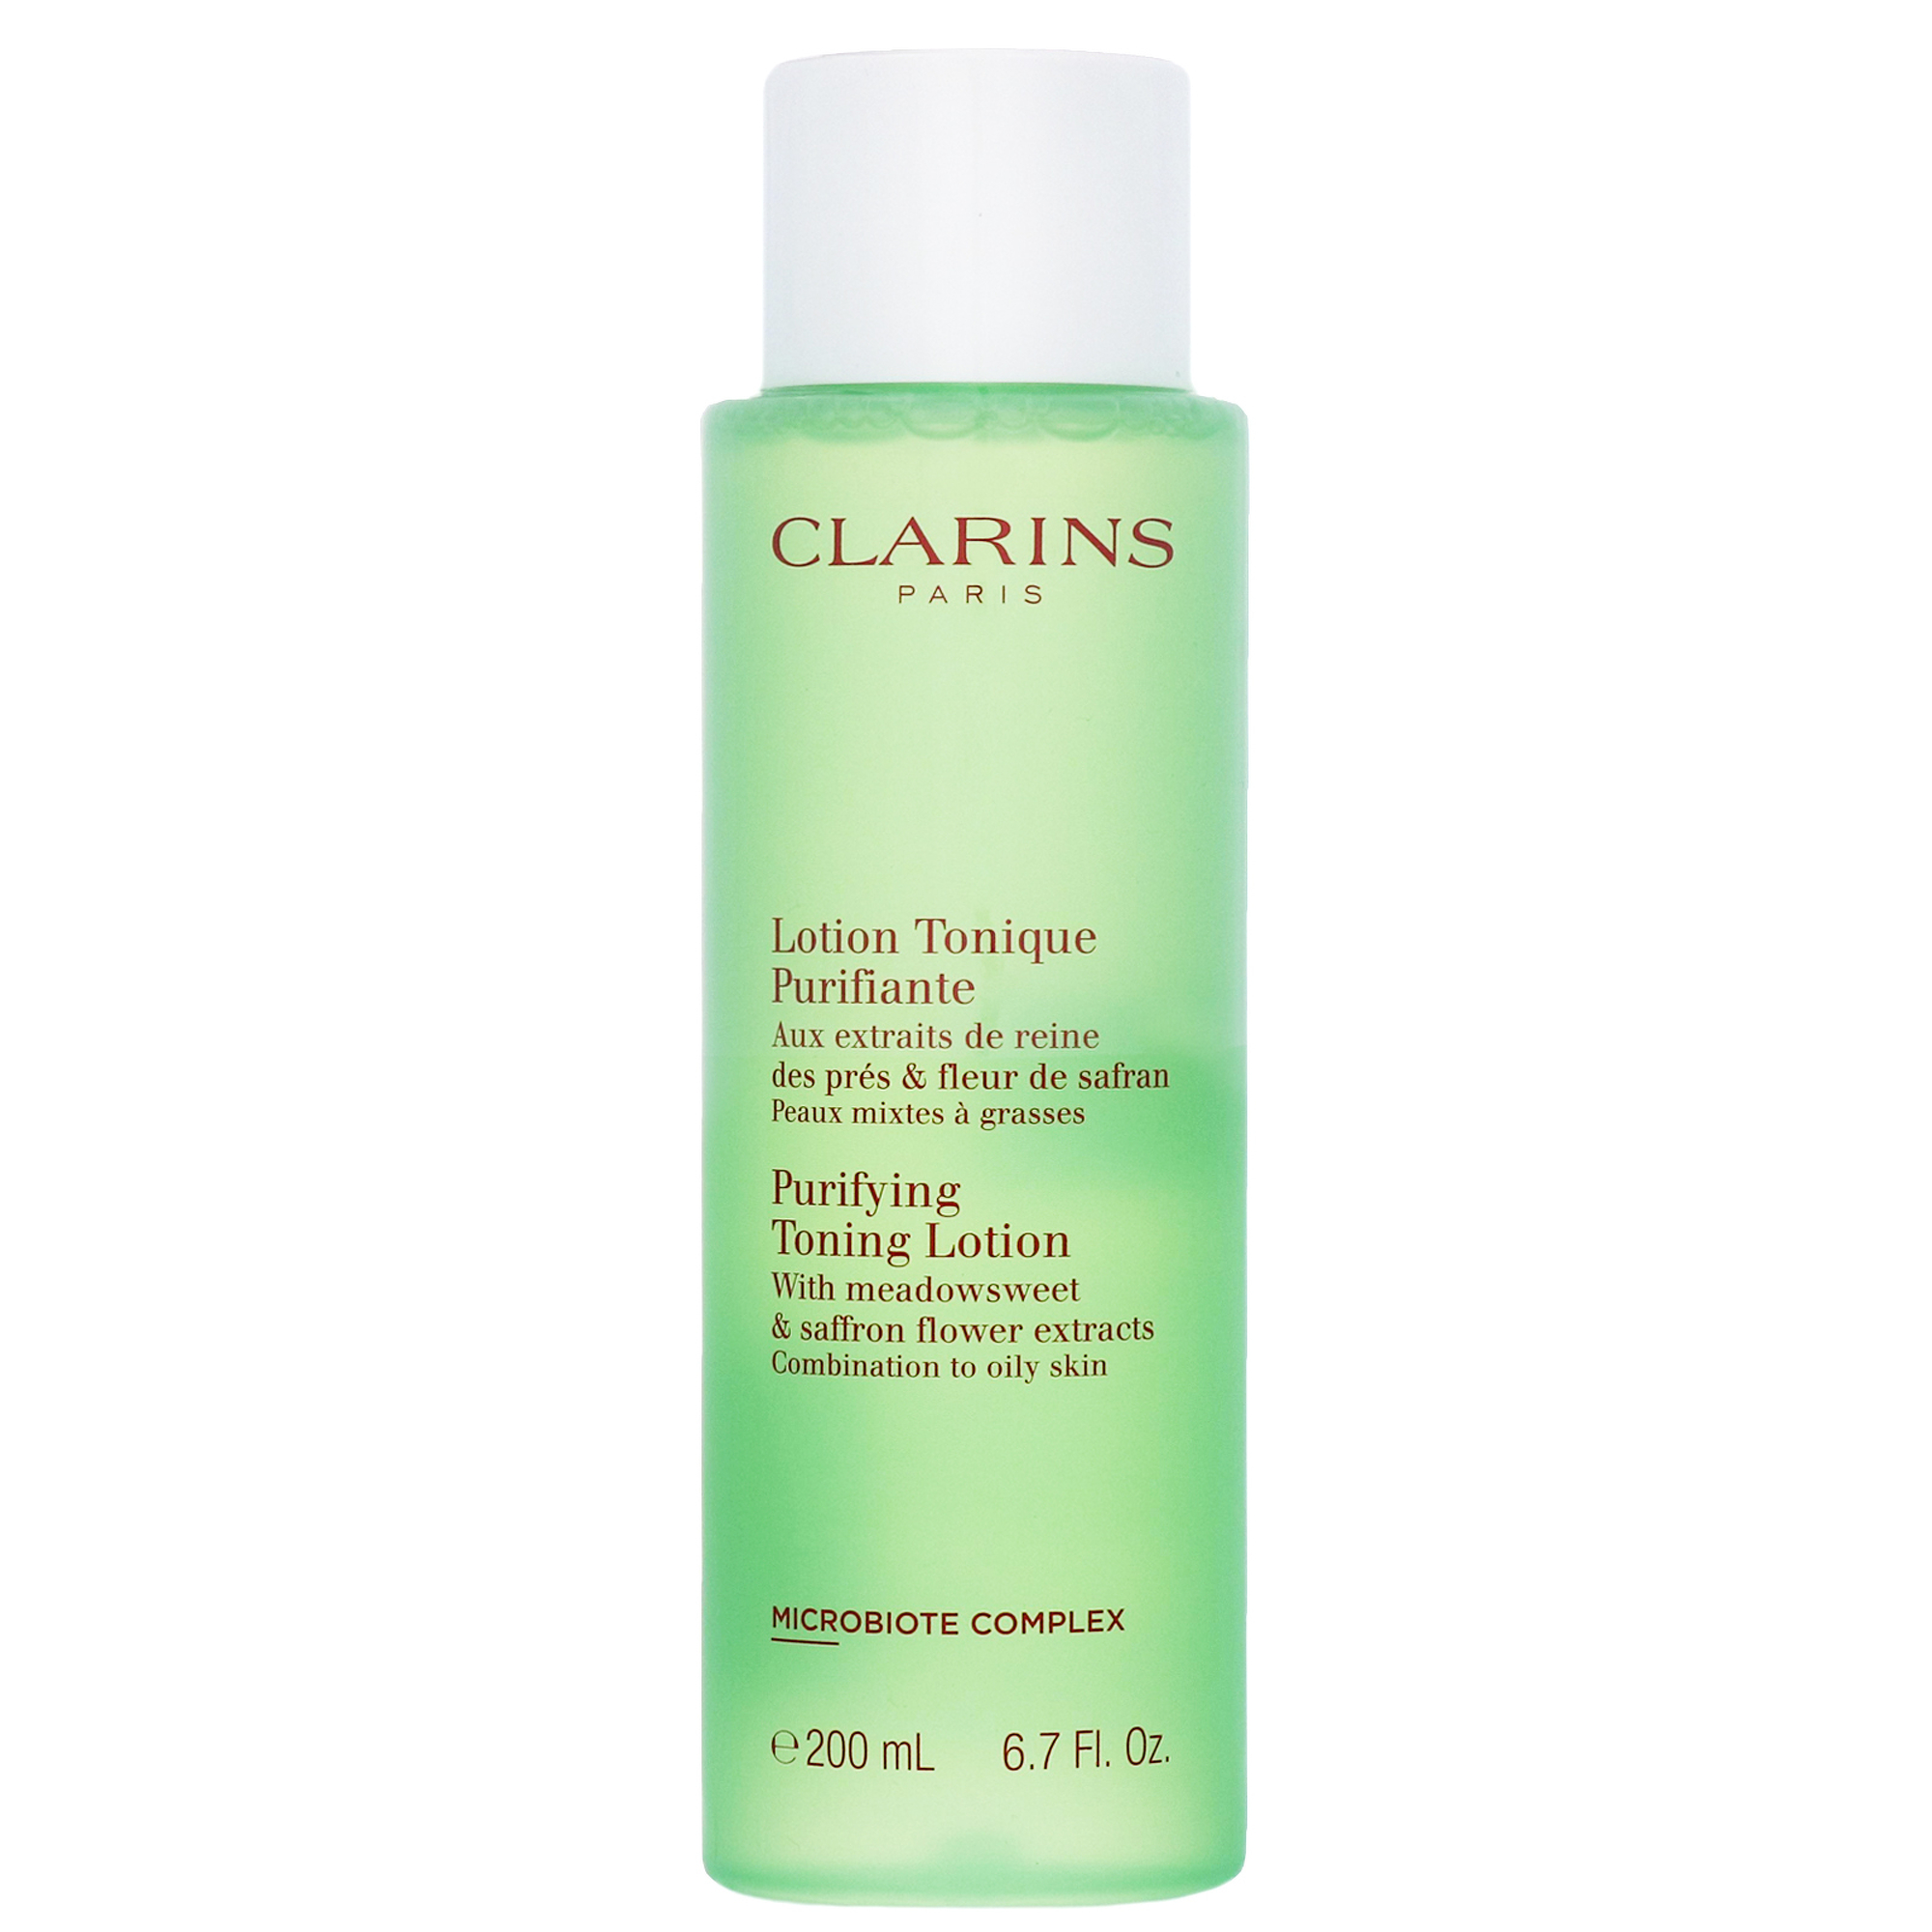 Photos - Facial / Body Cleansing Product Clarins Cleansers & Toners Purifying Toning Lotion 200ml 